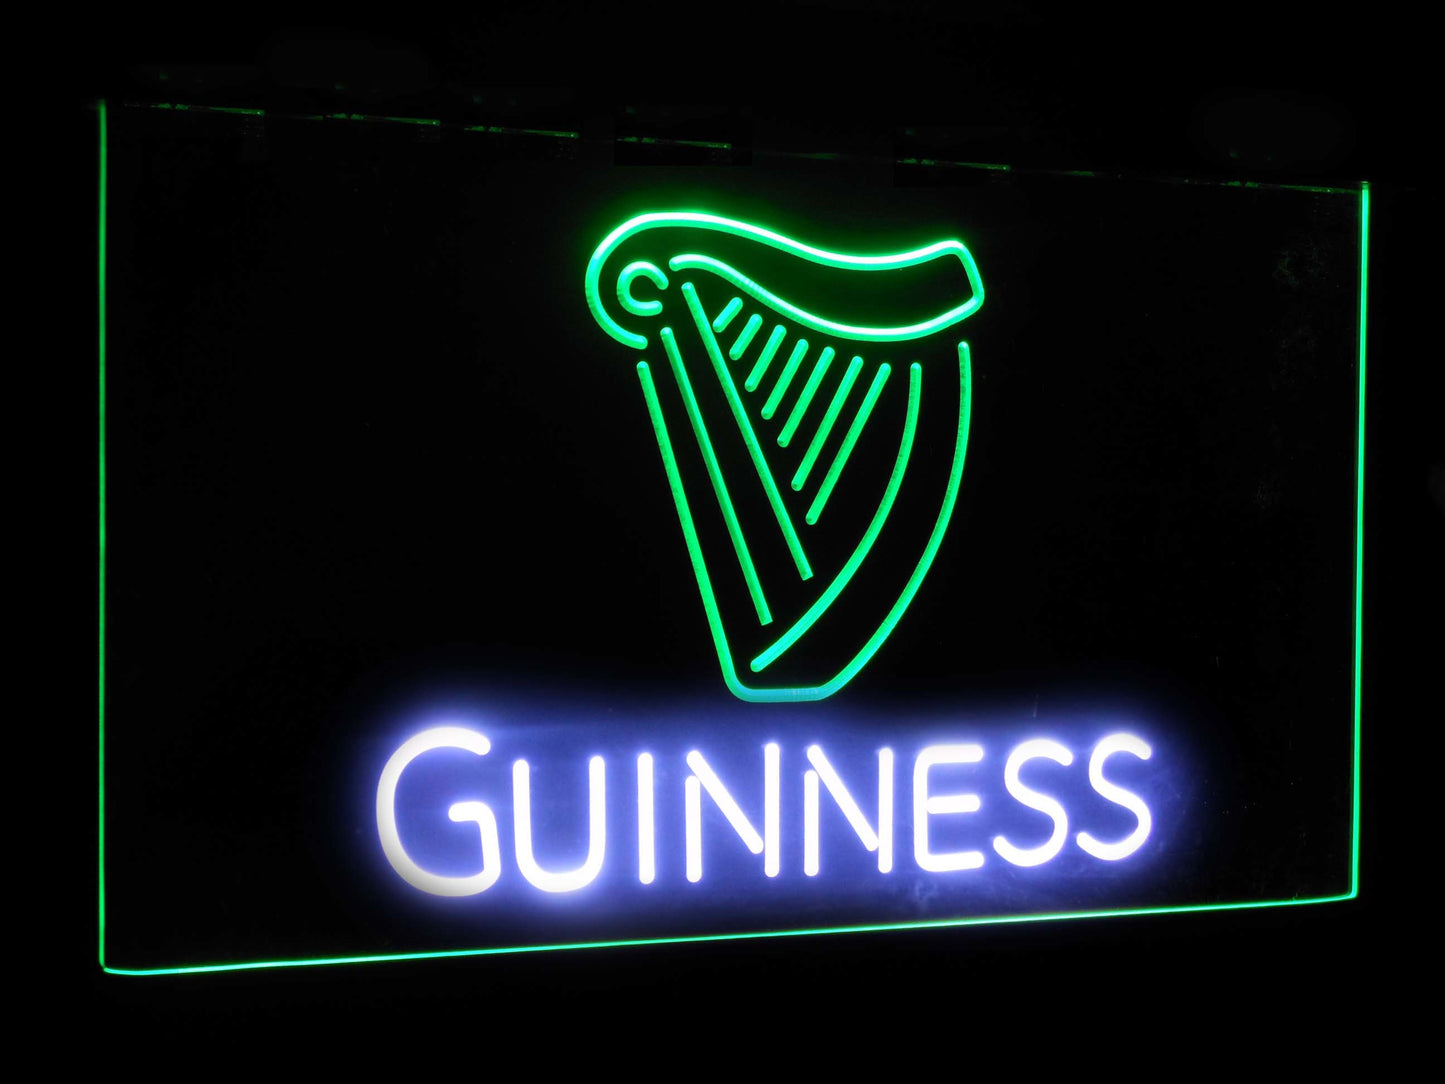 Guinness Ale  Bar Decoration Gift Dual Color Led Neon Light Signs st6-a2002 by Woody Signs Co. - Handmade Crafted Unique Wooden Creative